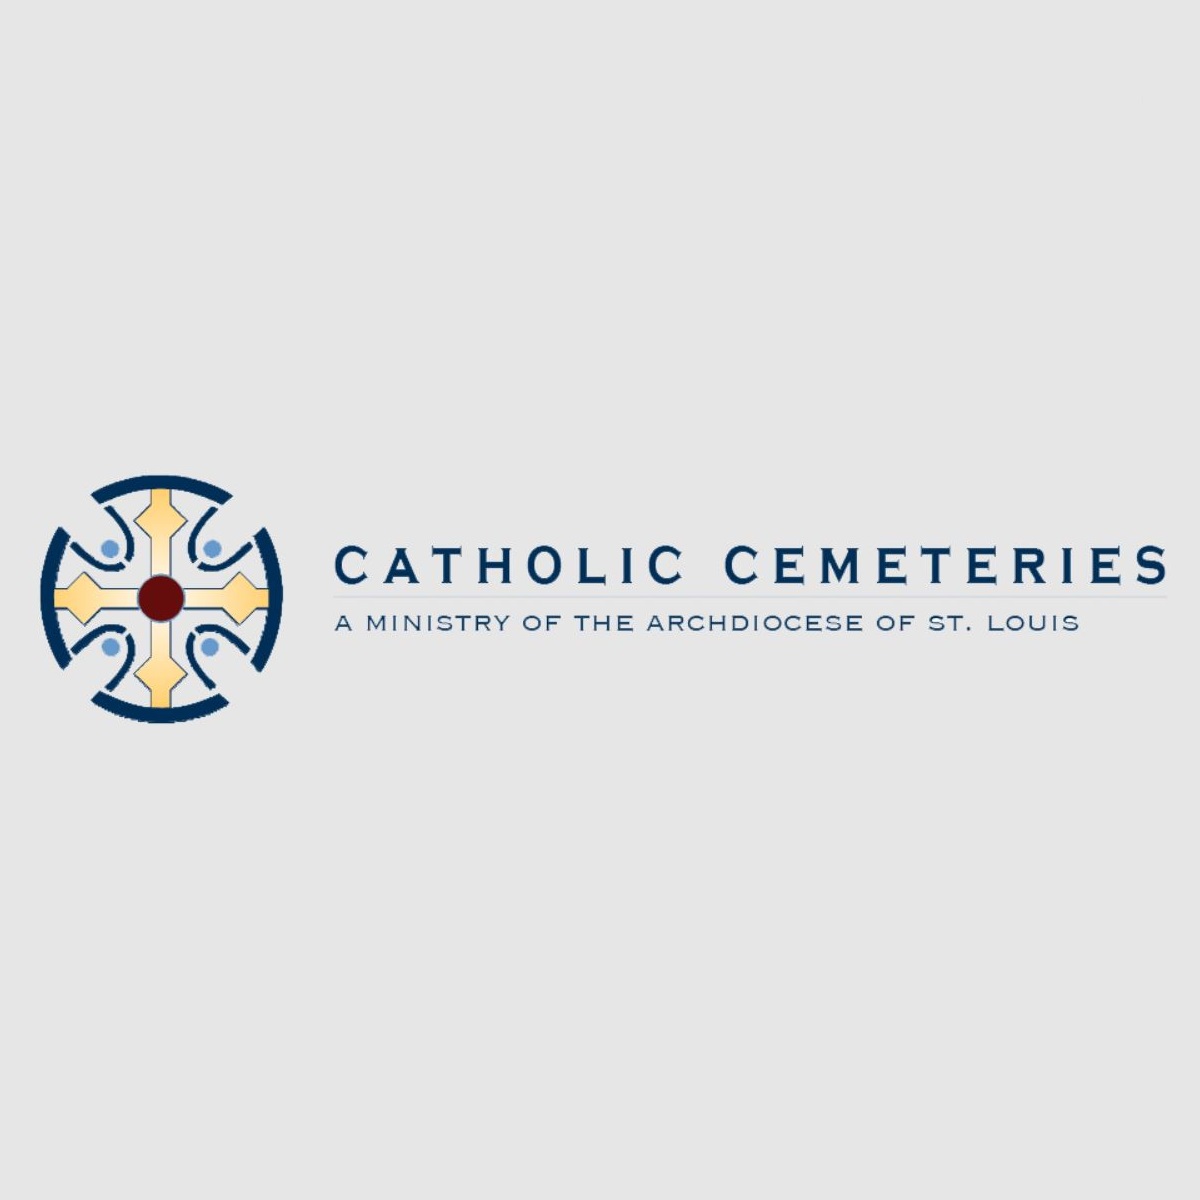 Ste Philippine Cemetery & Mausoleum | 4057 Towers Rd, St Charles, MO 63304, United States | Phone: (314) 792-7738